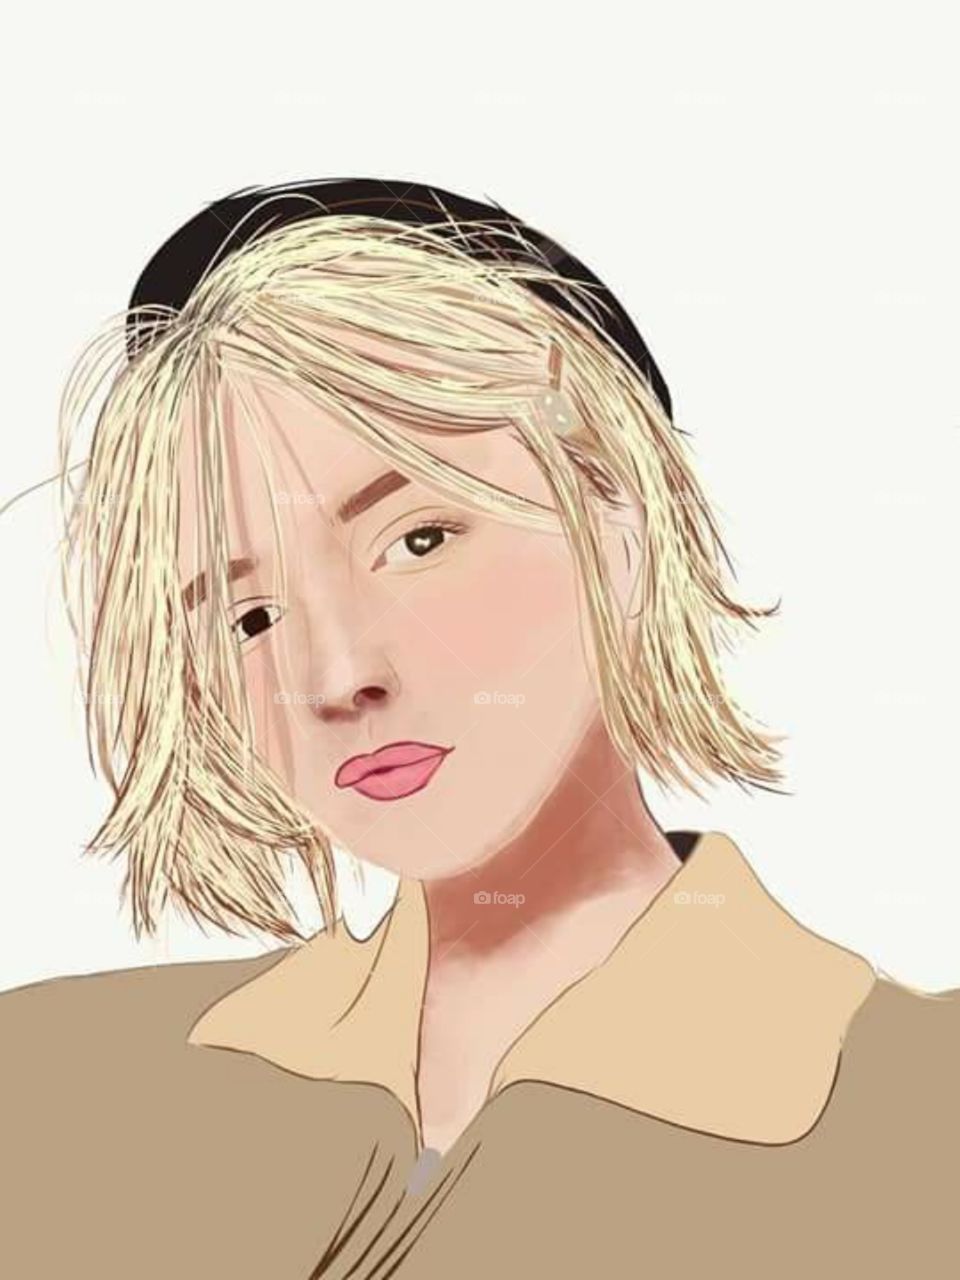 I don't know if this is allowable here. But it is a digital art of mine. I don't really know who this girl is. 🤣